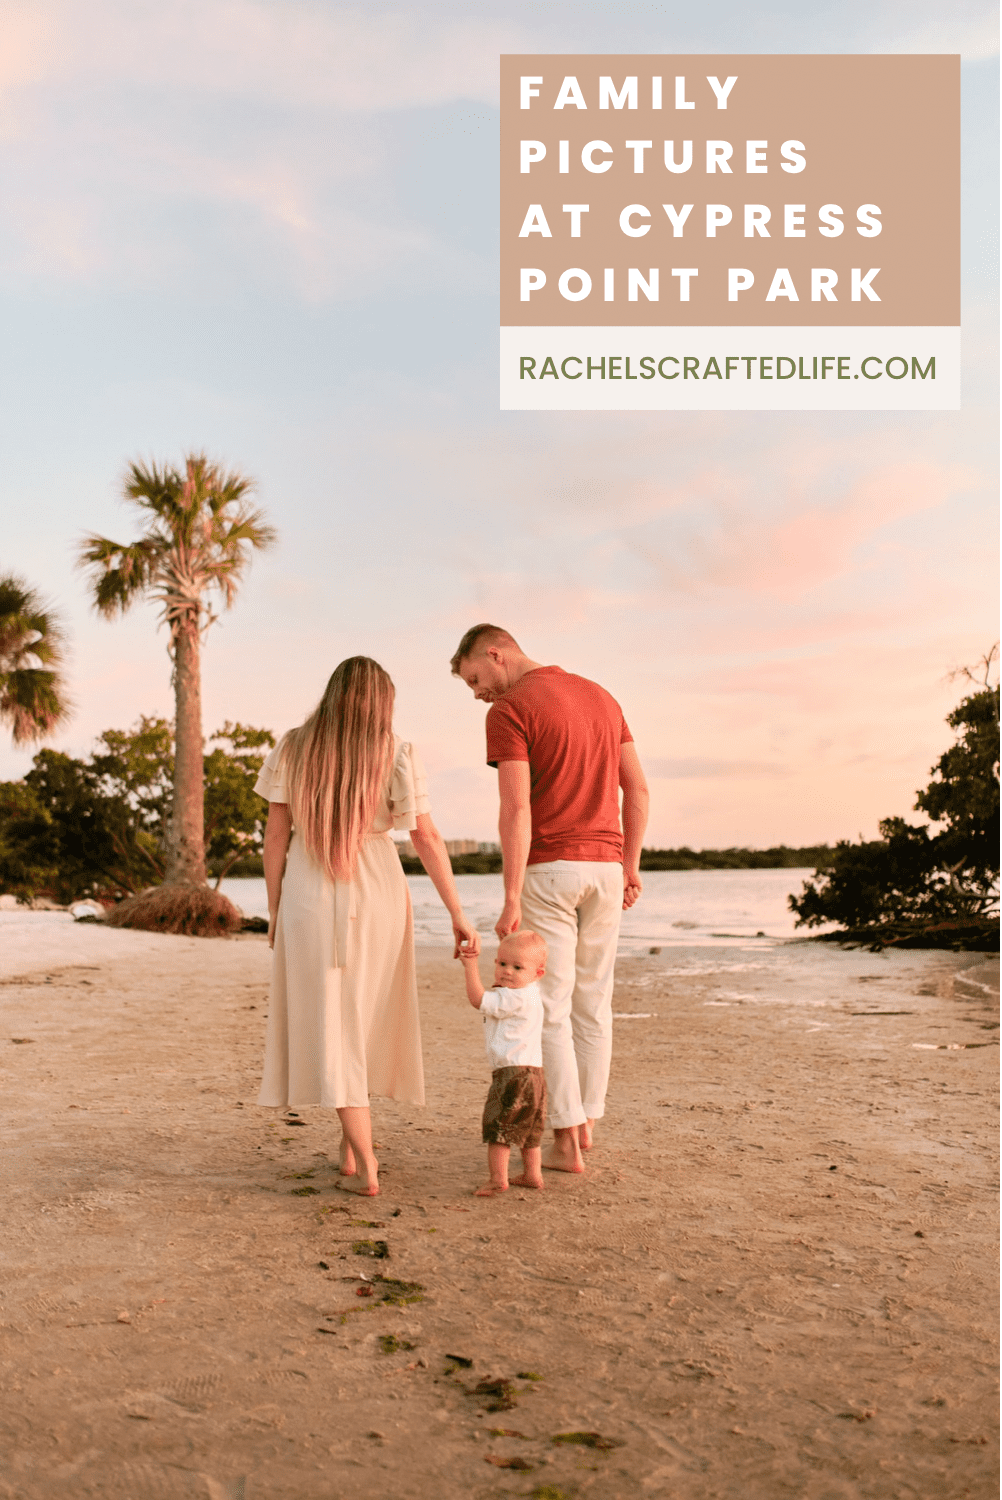 You are currently viewing Cypress Point Park: What You Need to Know + Family Pictures